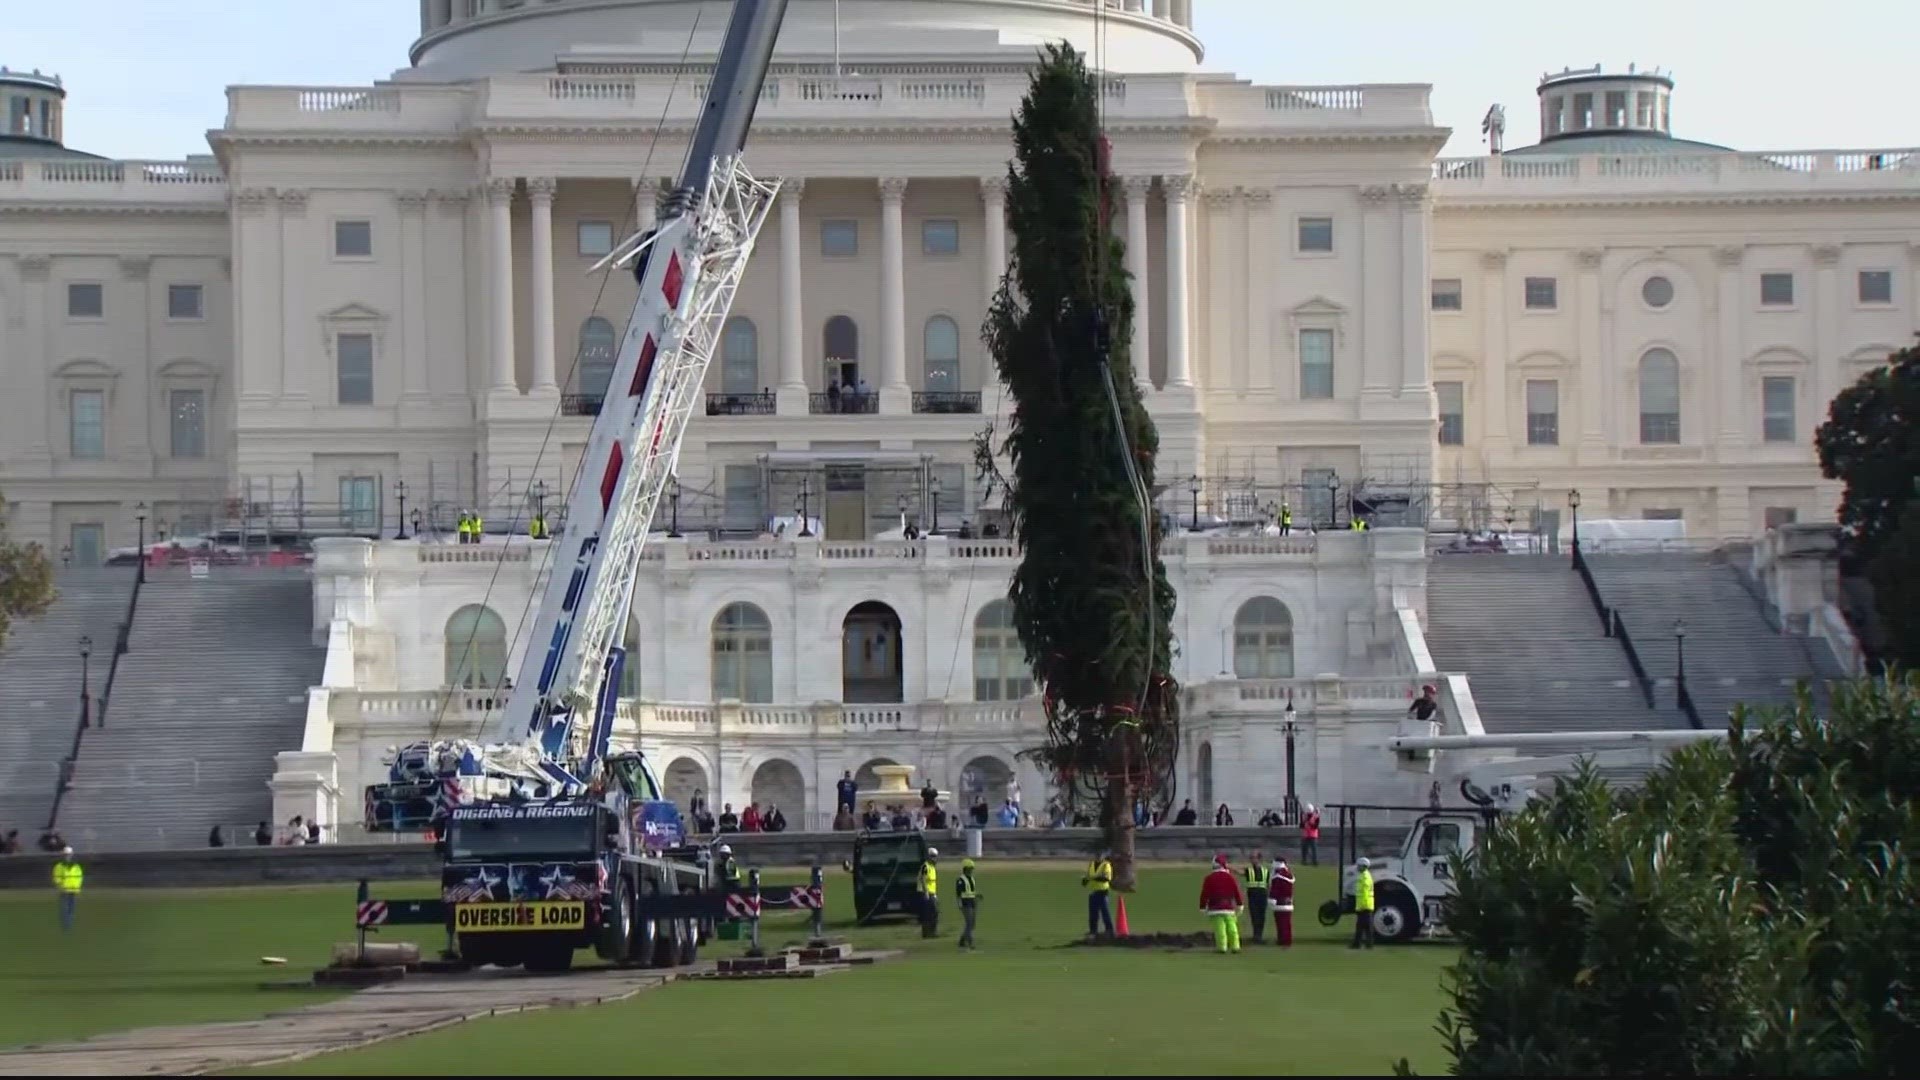 This year's tree is a 63-foot spruce from West Virginia. The tree will be lit in a ceremony on Tuesday, Nov. 28.